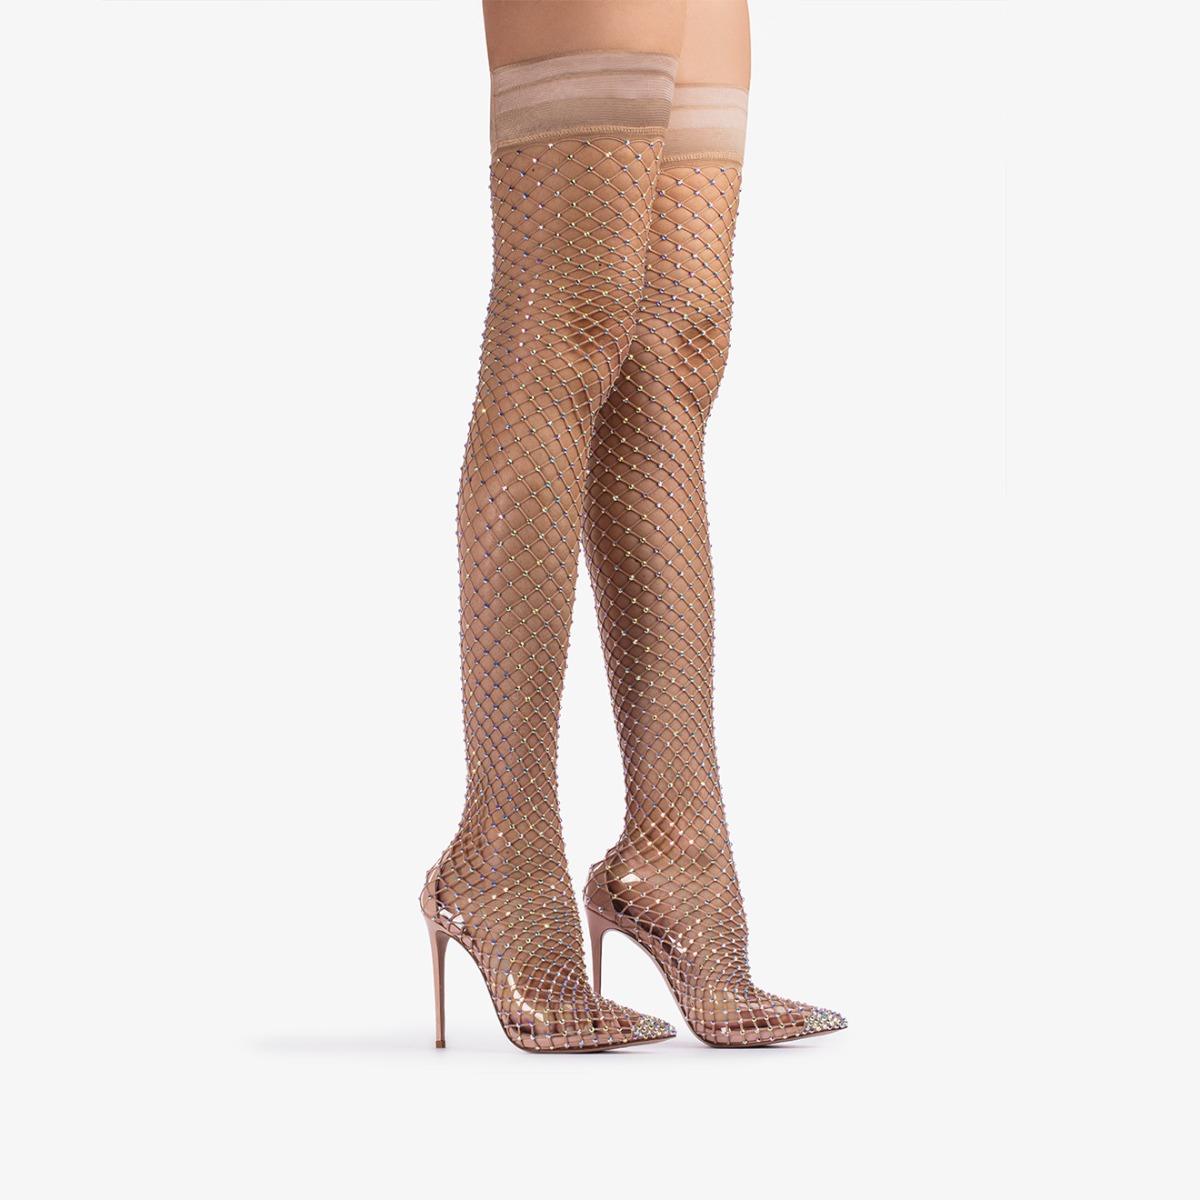 GILDA THIGH-HIGH BOOT 120 mm - Le Silla | Official Online Store